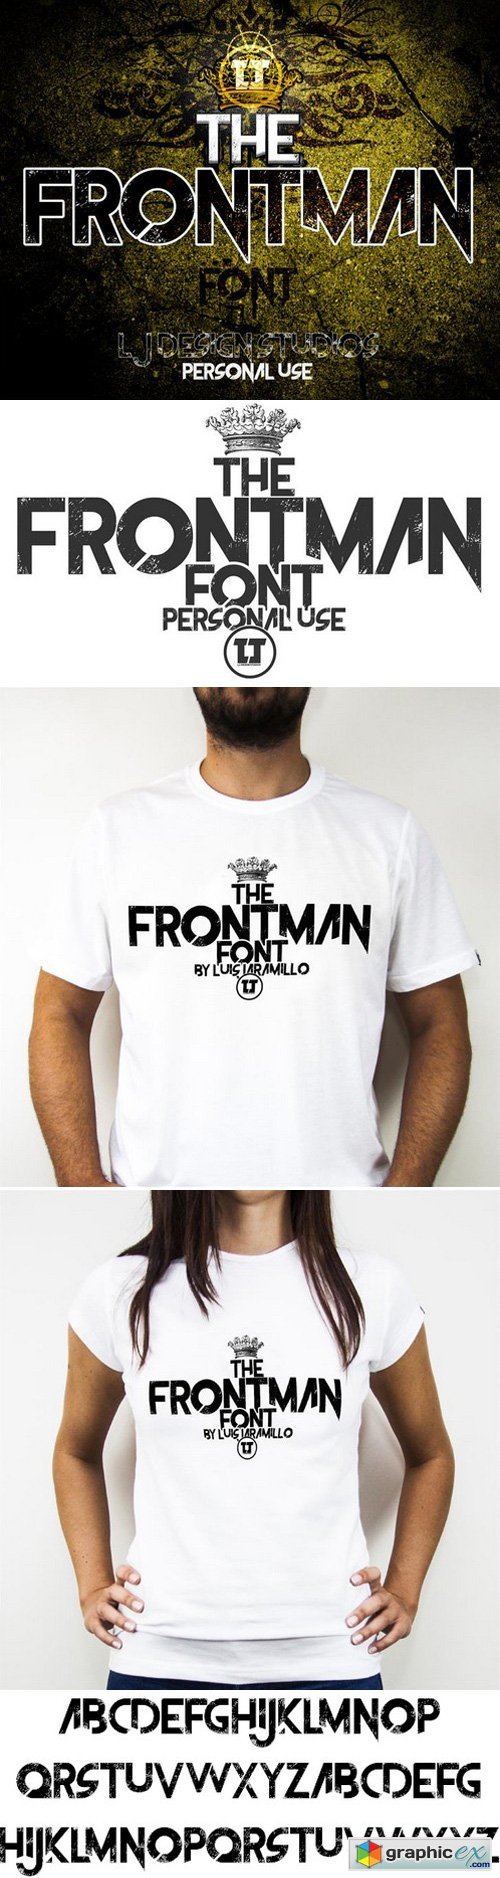 The Frontman Font